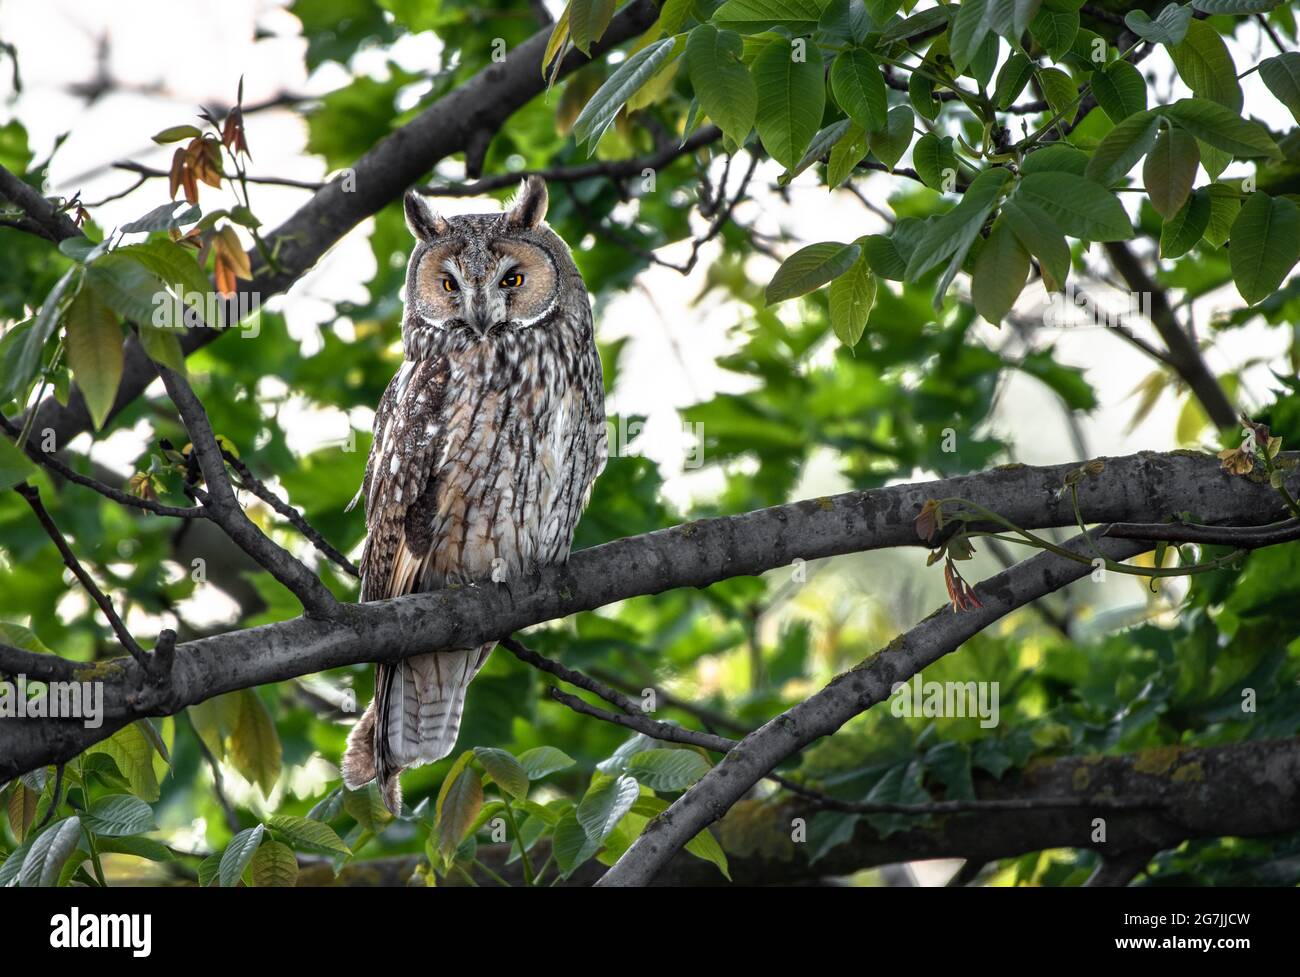 aristocratic owl sitting on tree branch, cute Long-eared owl portrait, Asio Otus staring with big bright eyes wide open Stock Photo